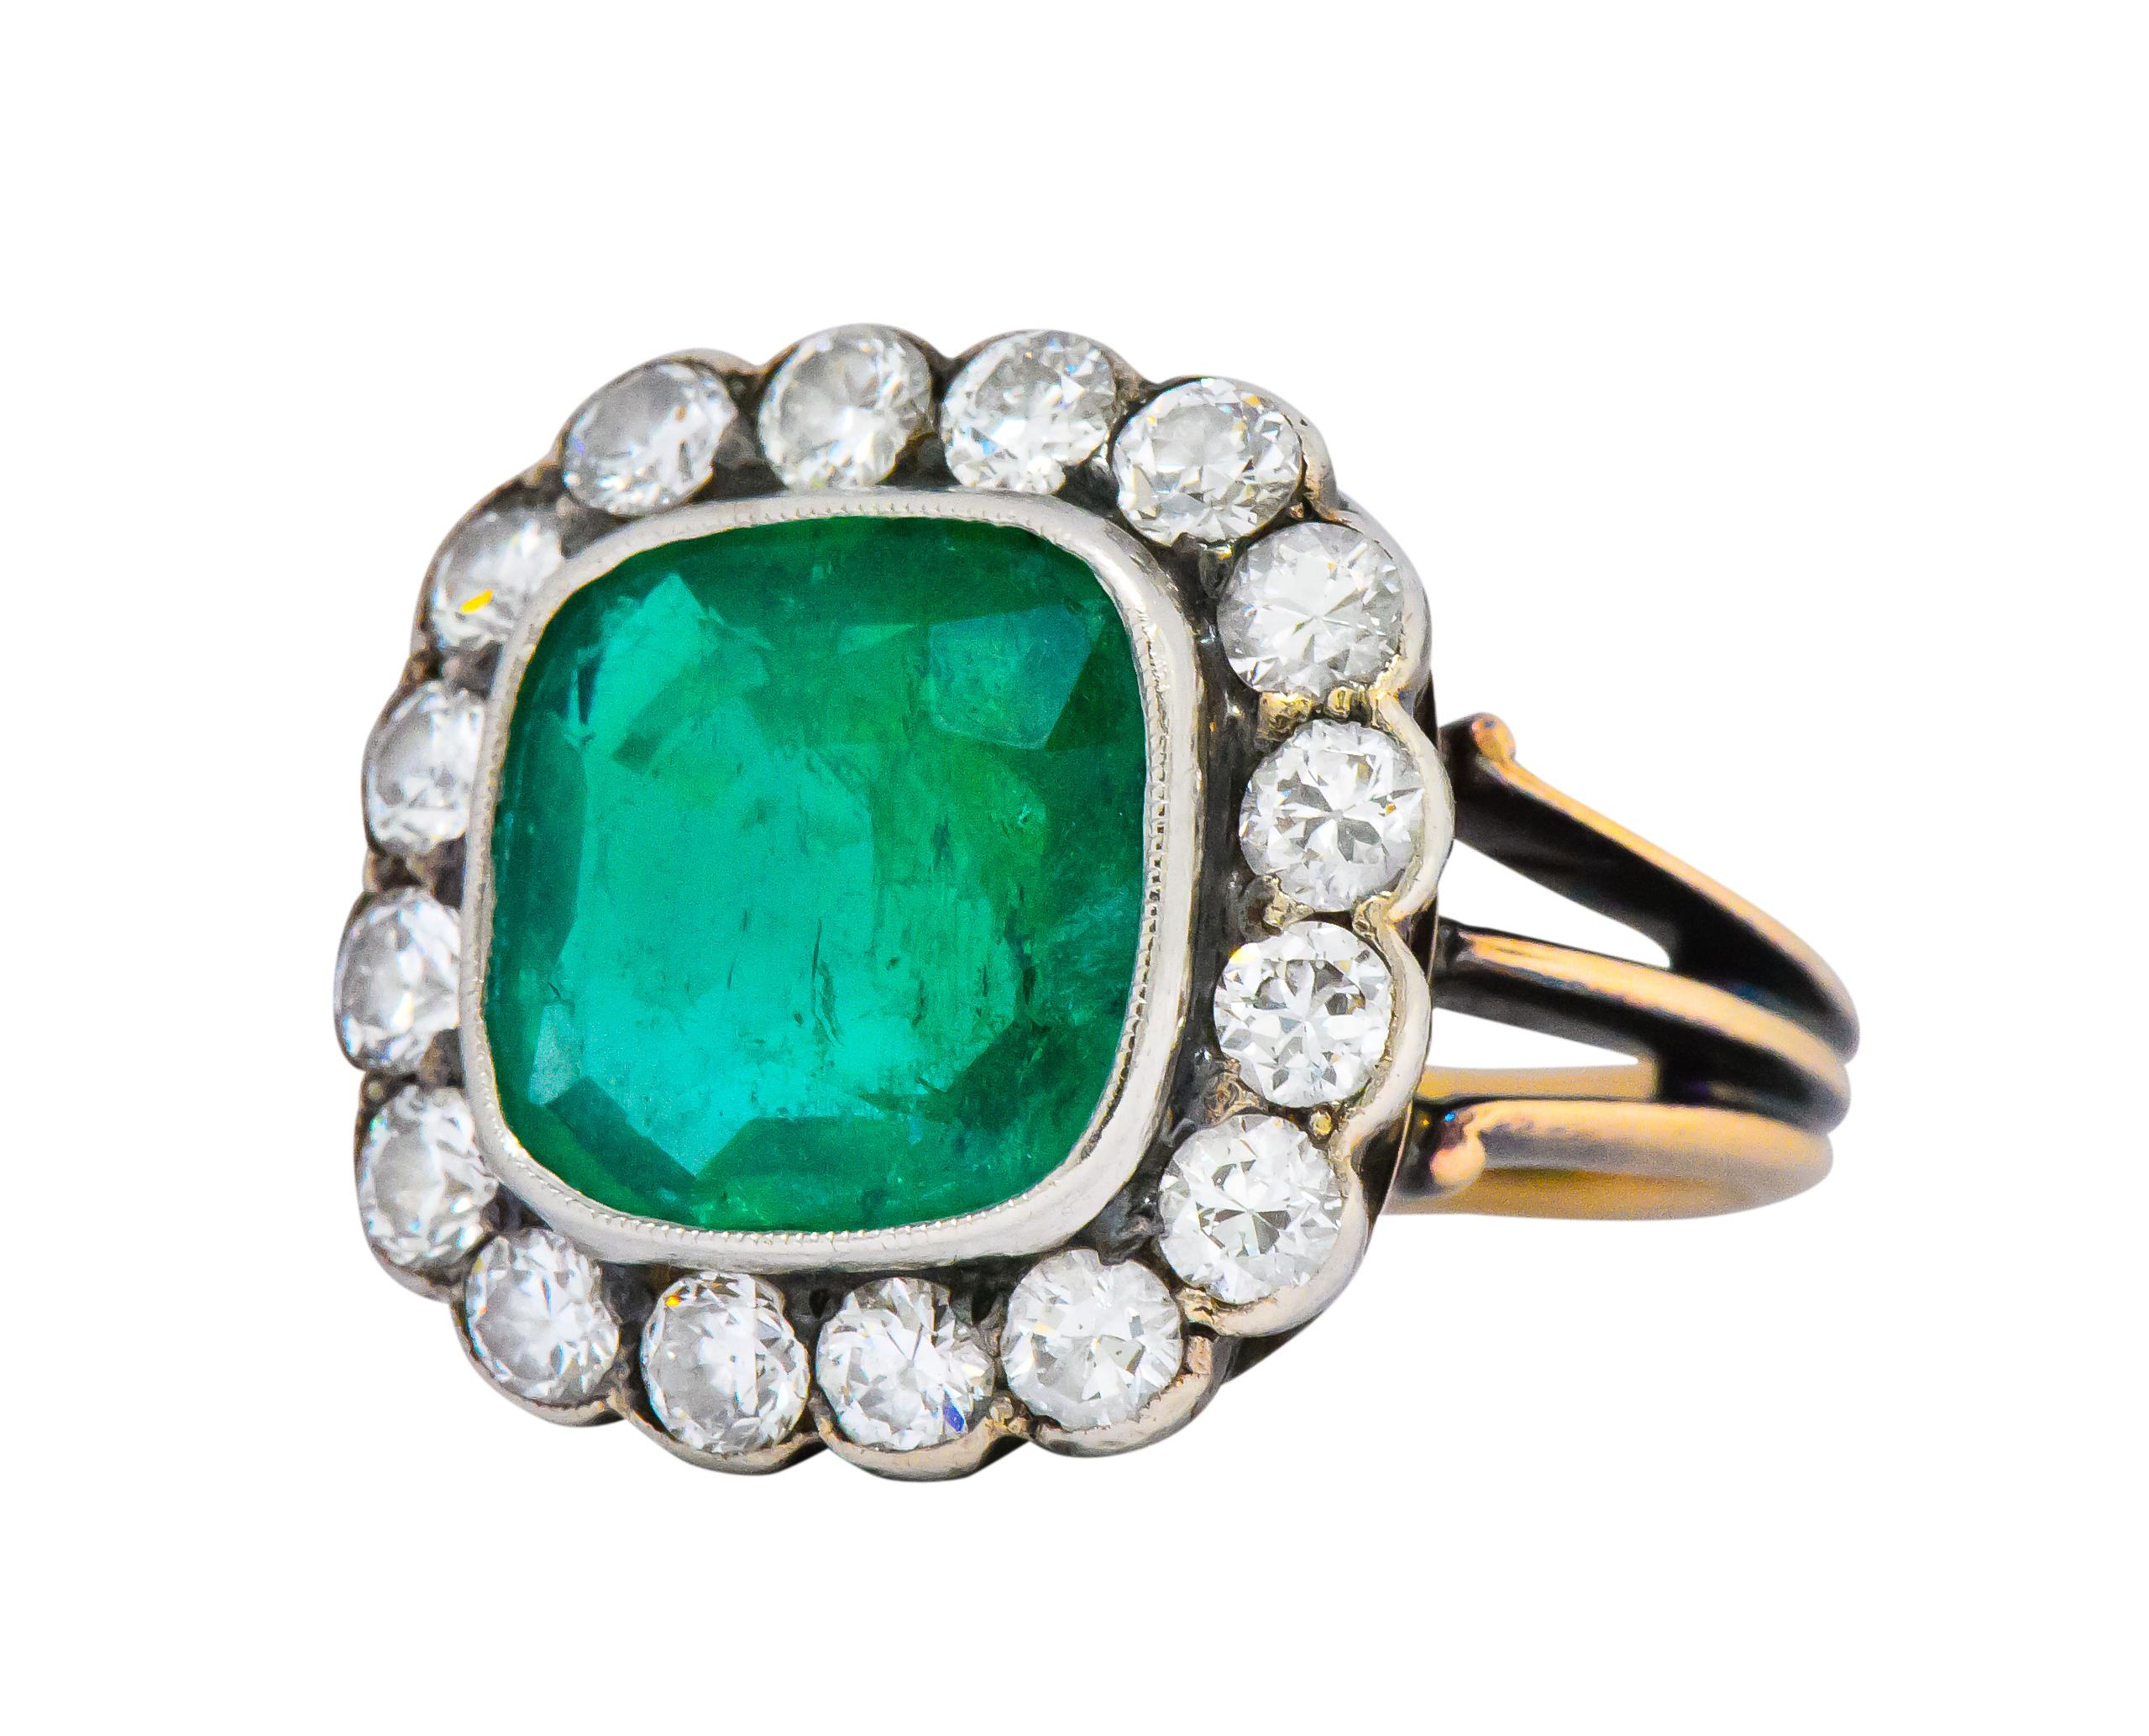 Centering a square cushion cut emerald, weighing approximately 3.25 carats, bright vivid green

With an old European cut diamond surround, weighing approximately 1.60 carats, GHI color and VS to SI clarity

With a tri-split and grooved shank

Tested